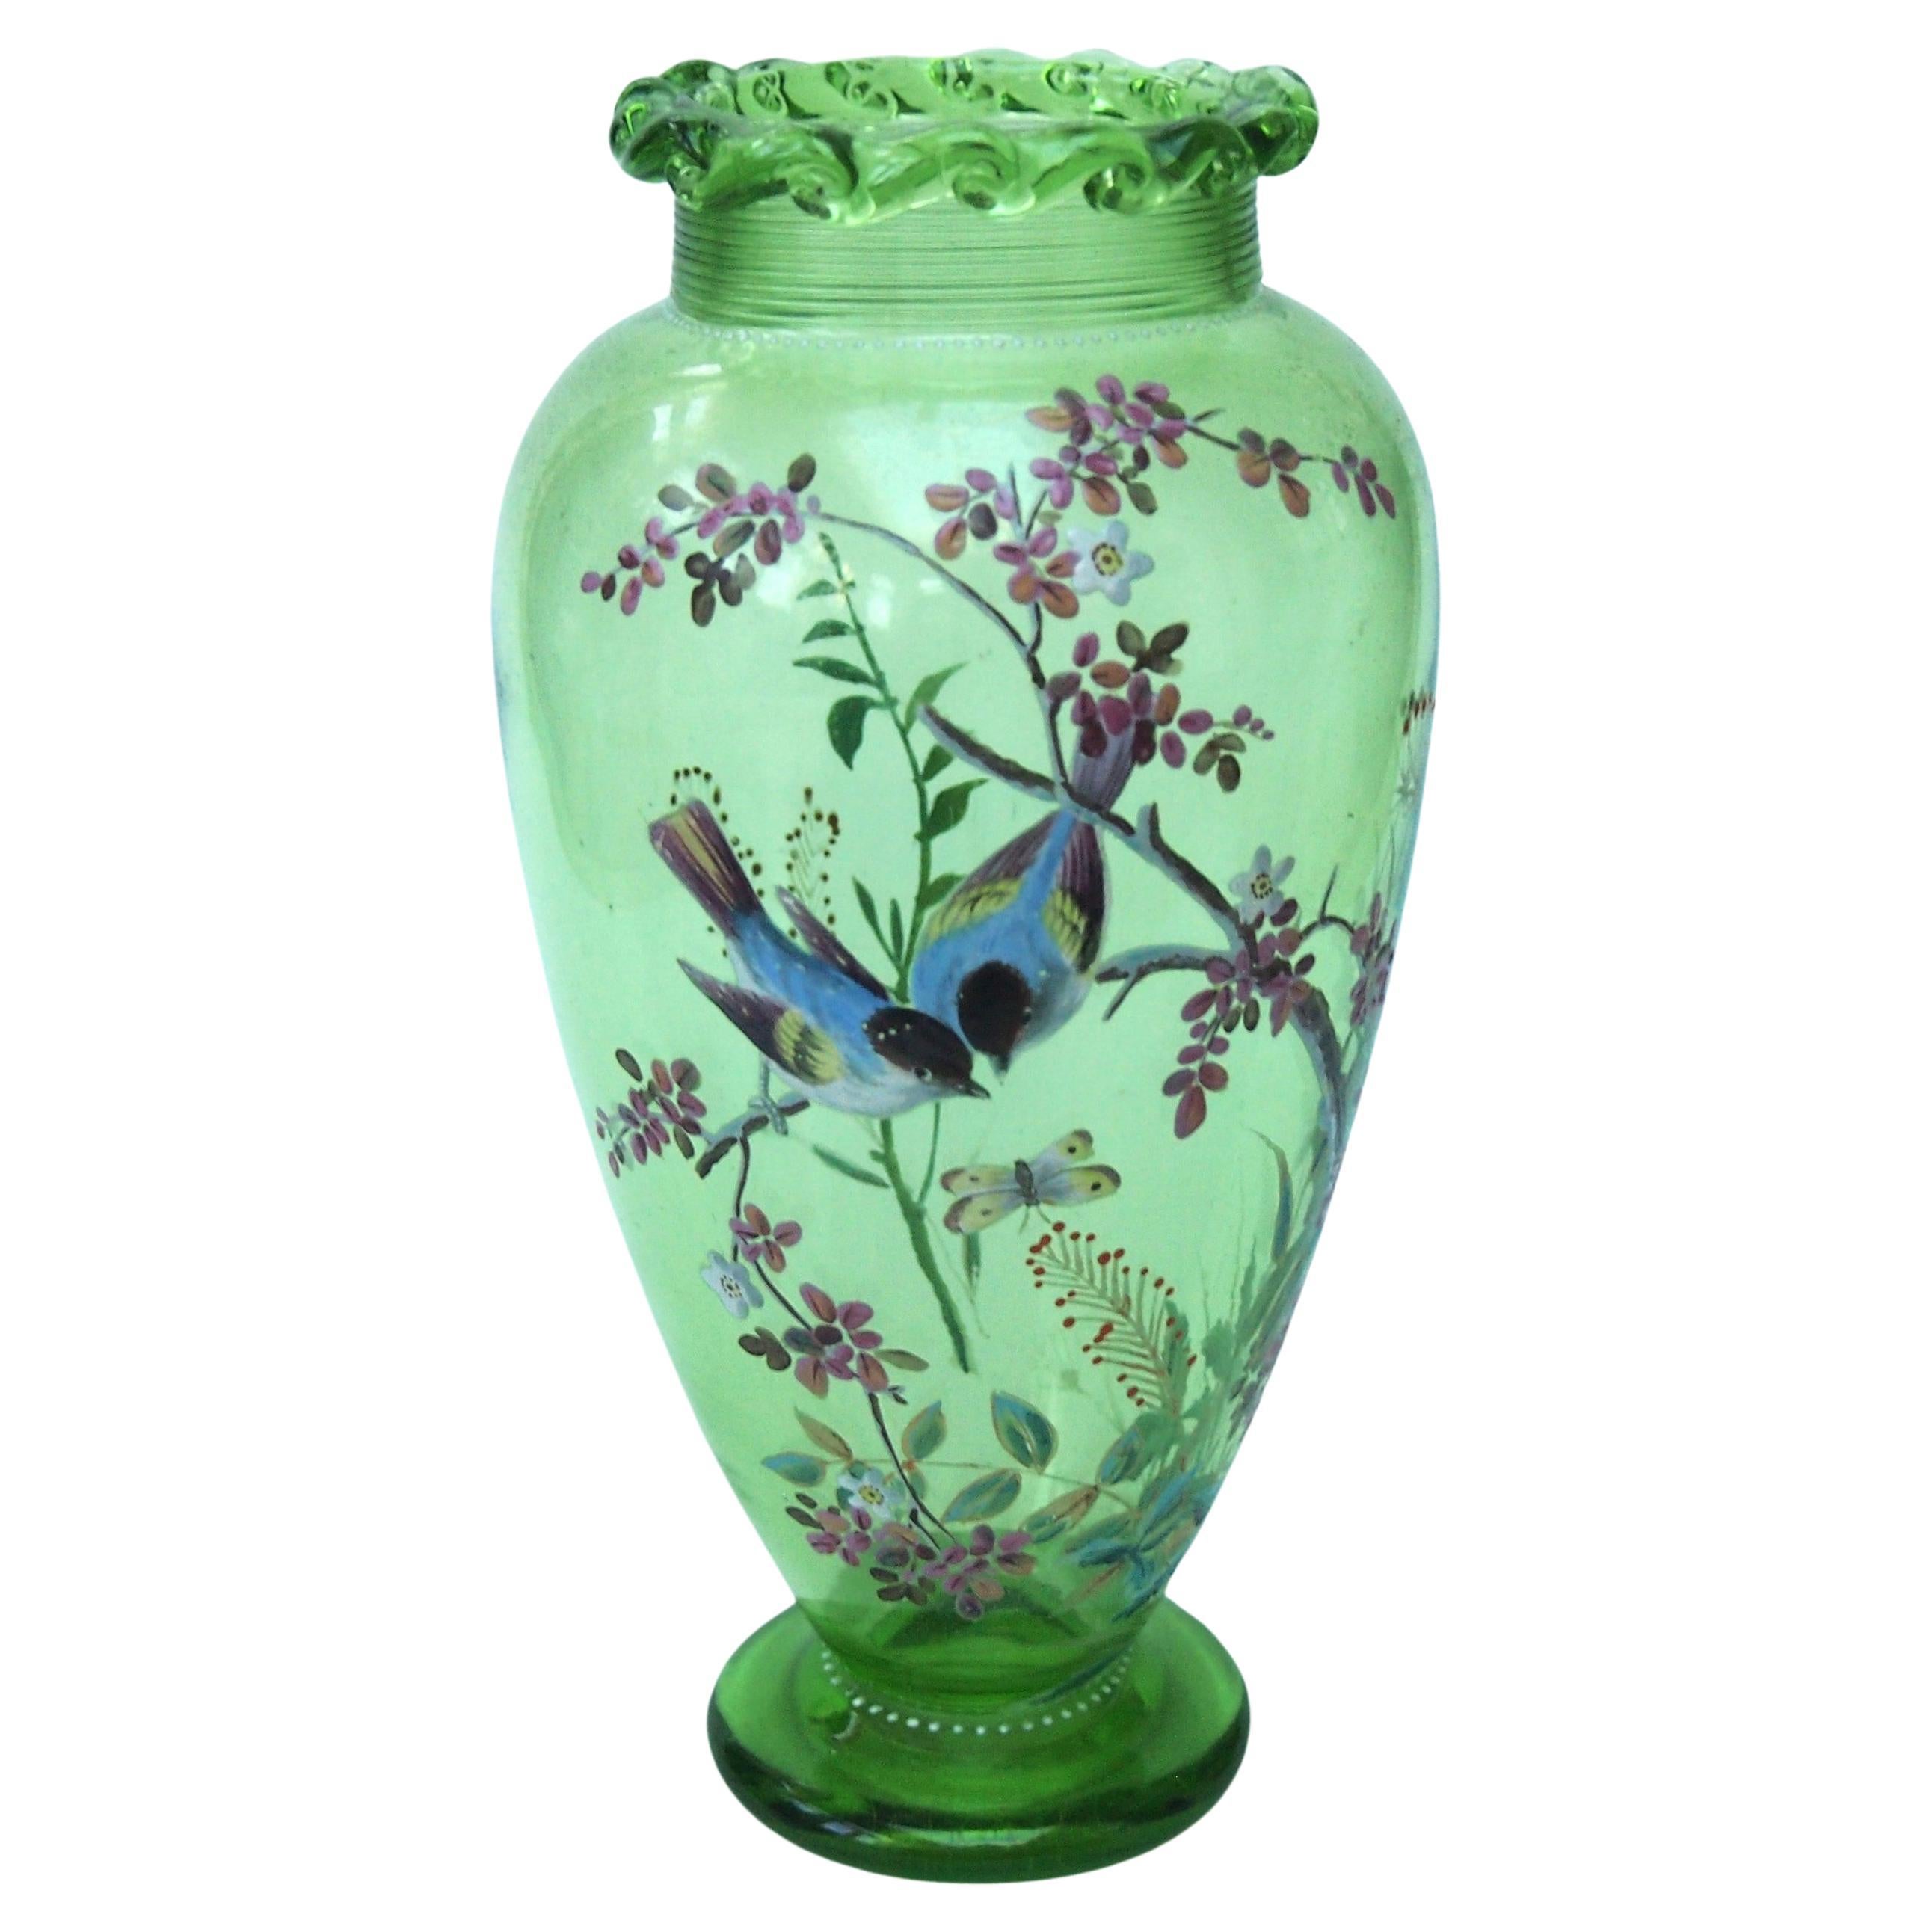 Harrach Glass Vase Decorated with Birds in Branches  c1890 For Sale